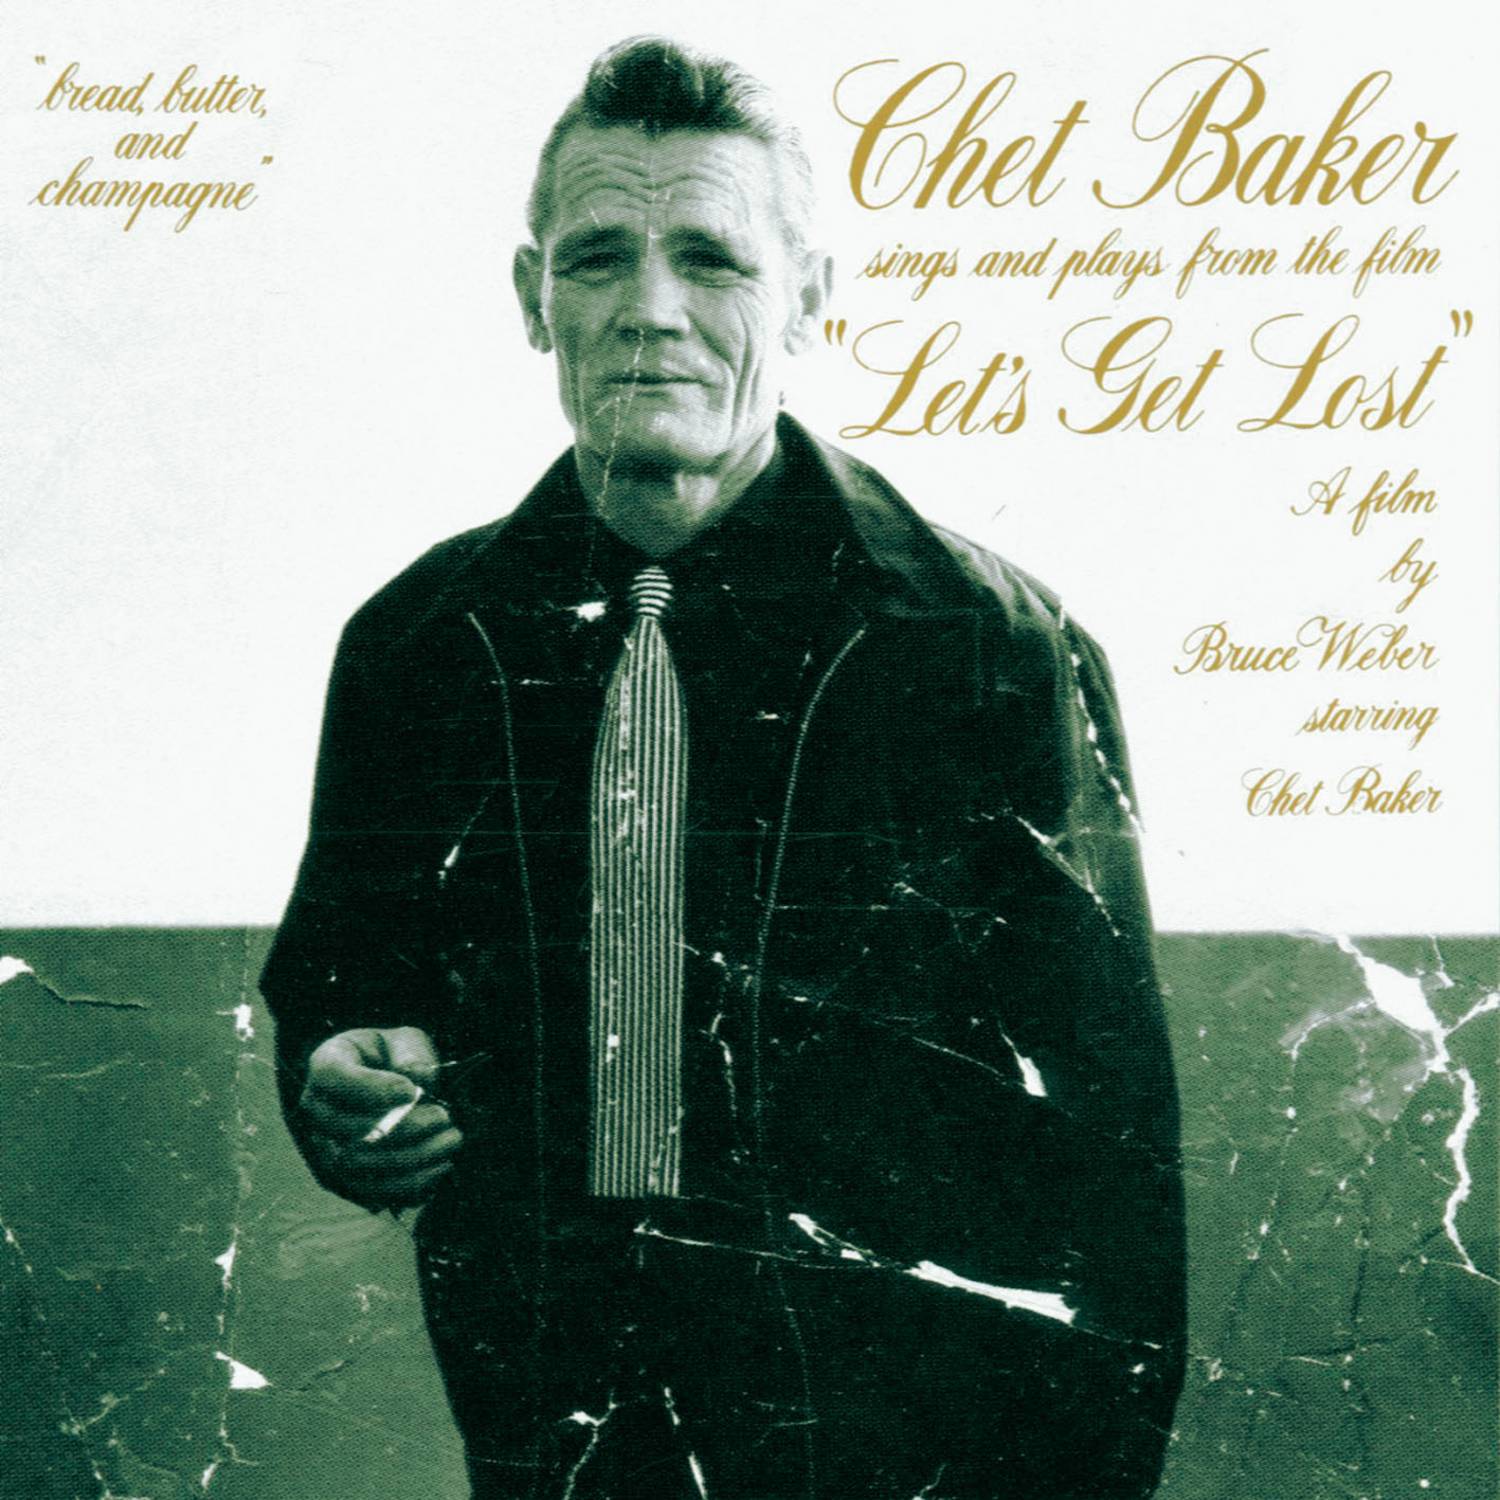 Chet Baker Sings And Plays From The Film "Let's Get Lost"专辑